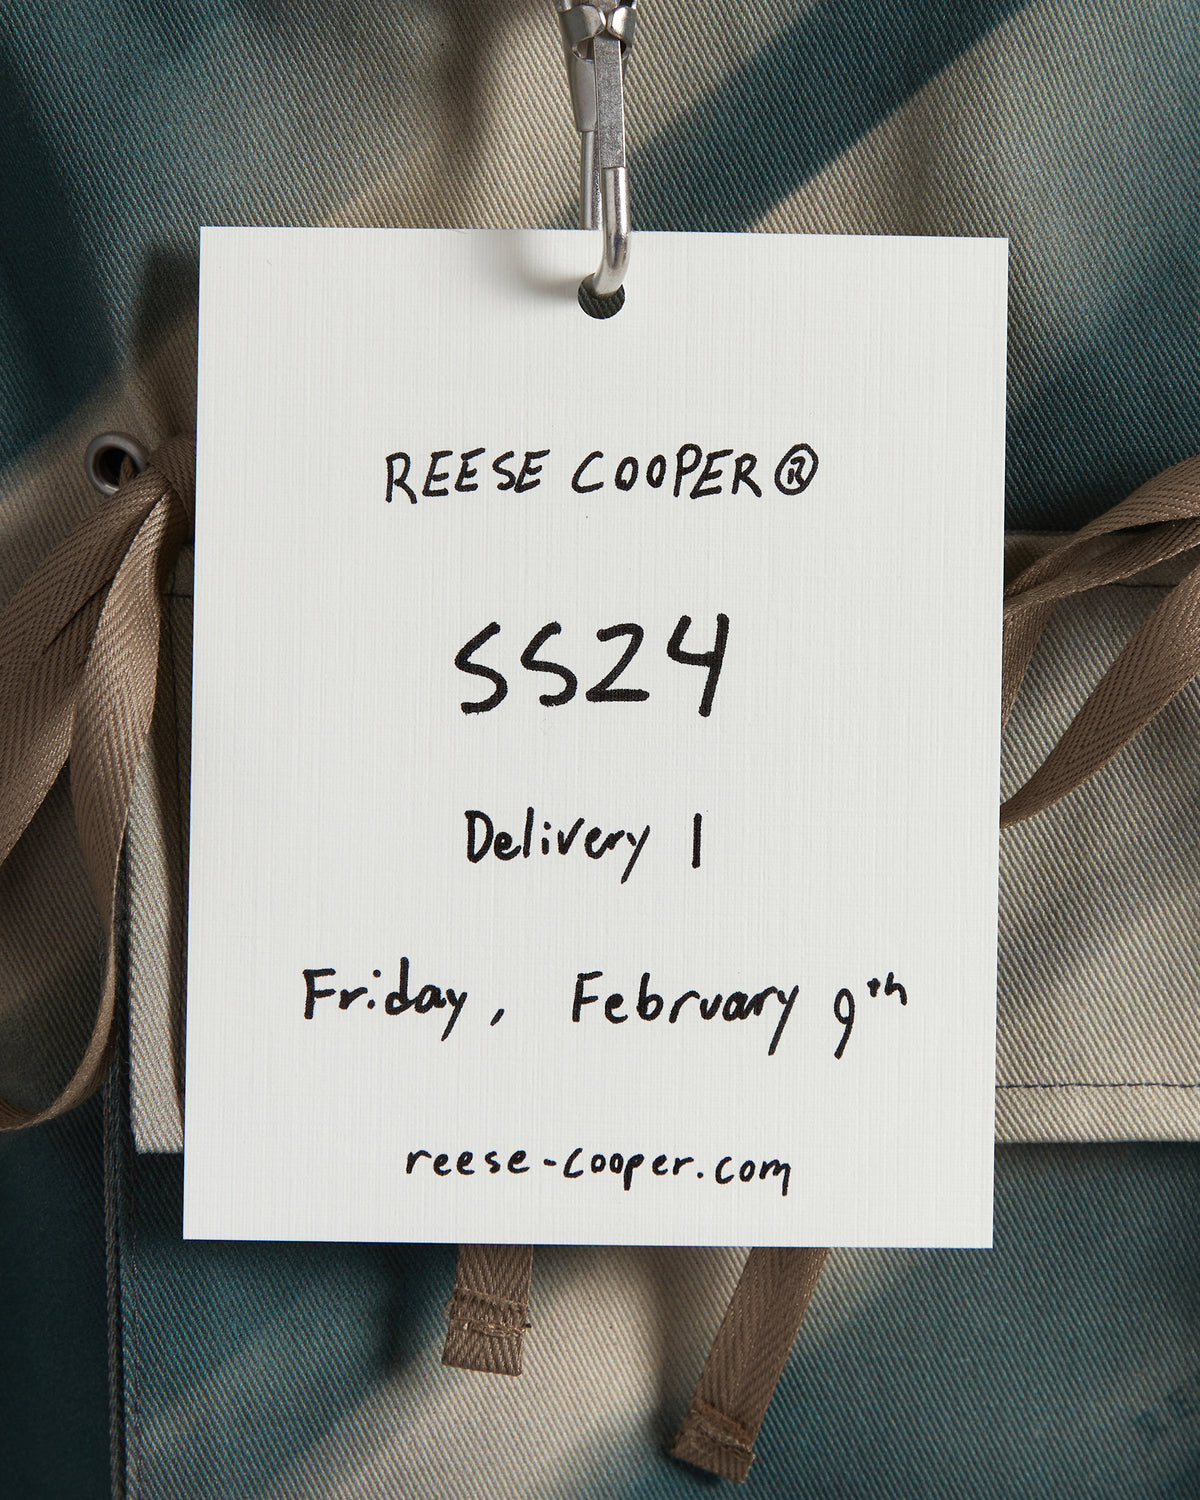 SS24 - Delivery 1:  Friday, February 9th.